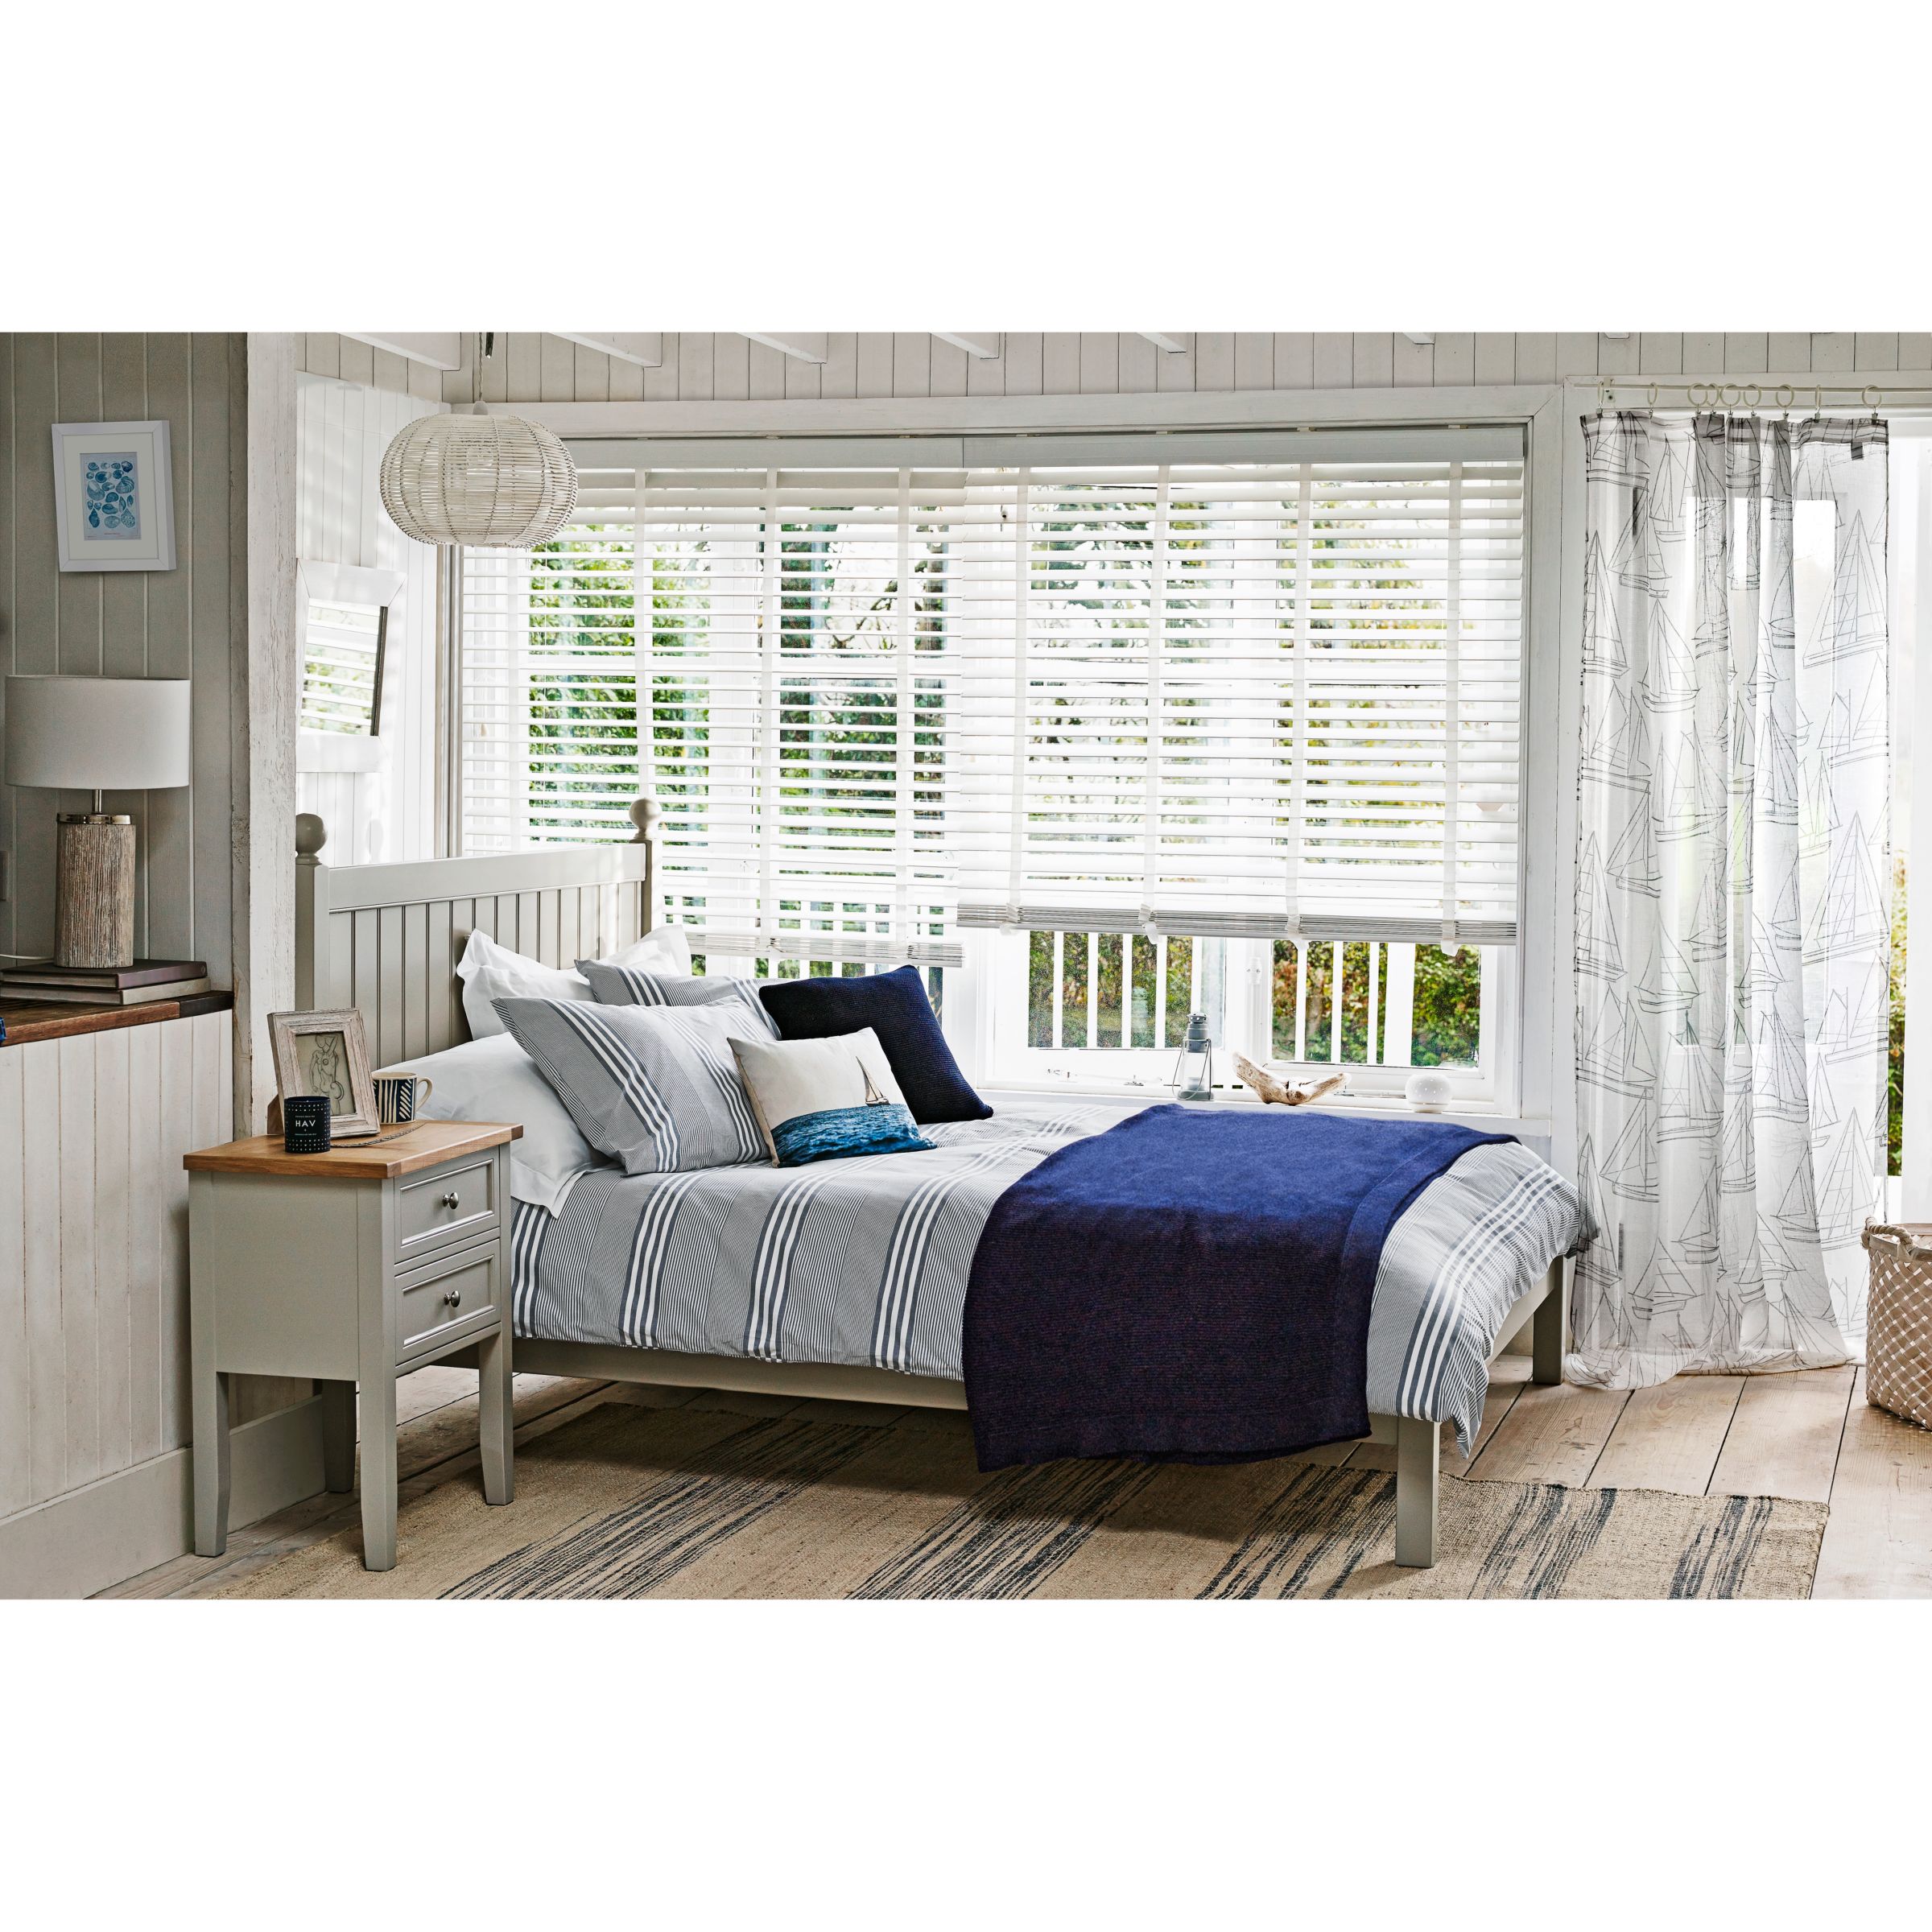 John Lewis Partners Textured And Decorative Variegated Stripe